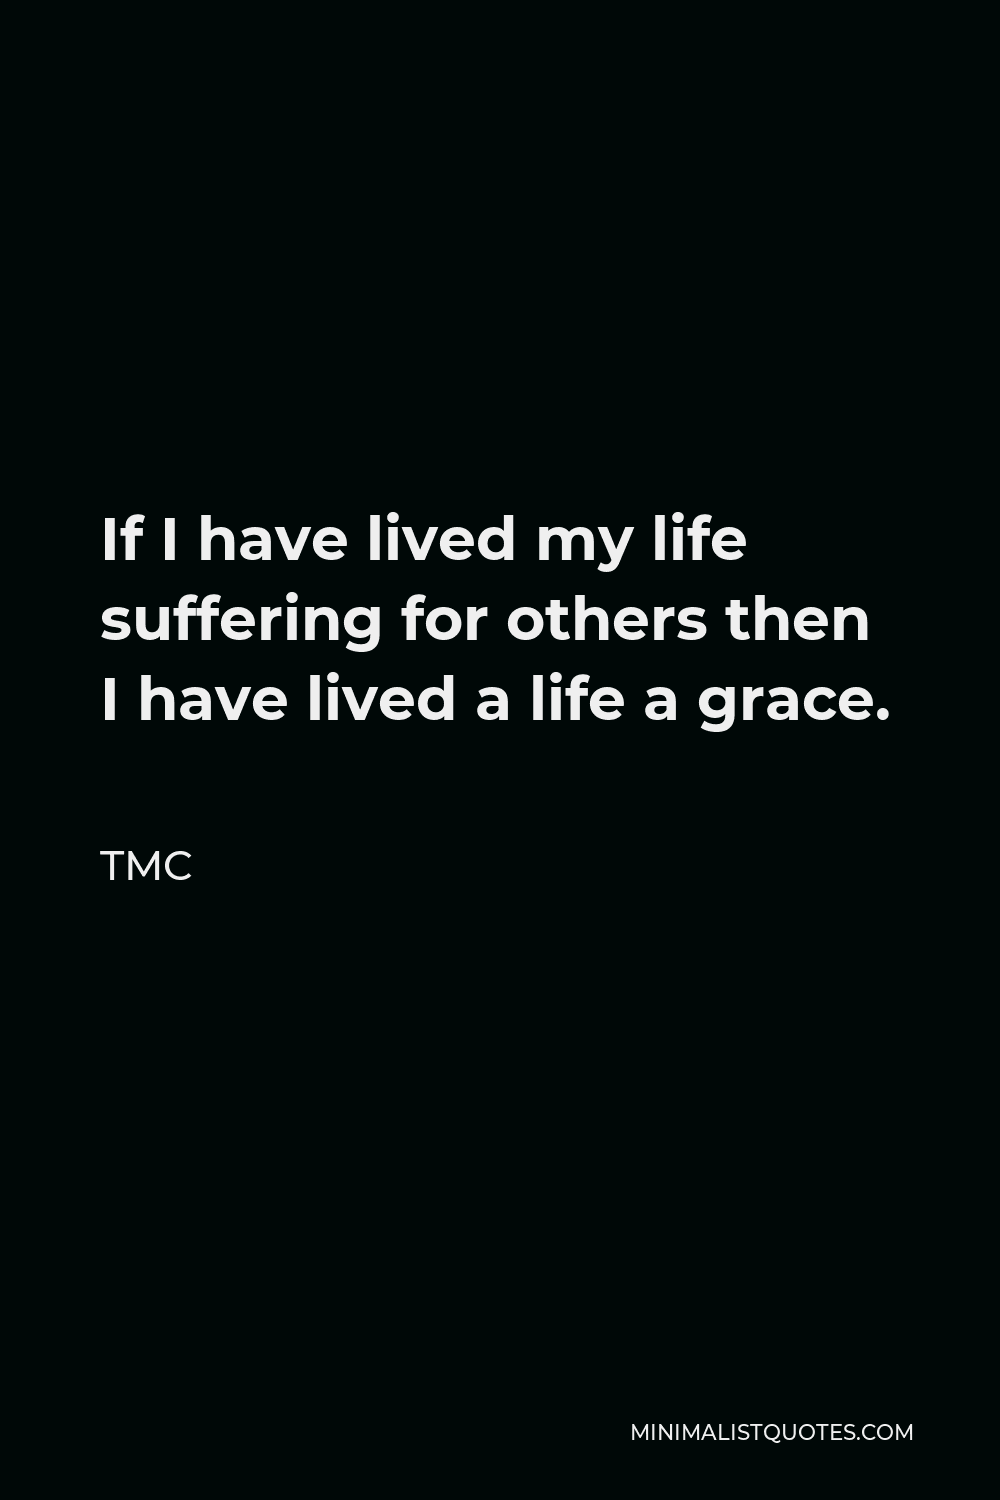 TMC Quote - If I have lived my life suffering for others then I have lived a life a grace.